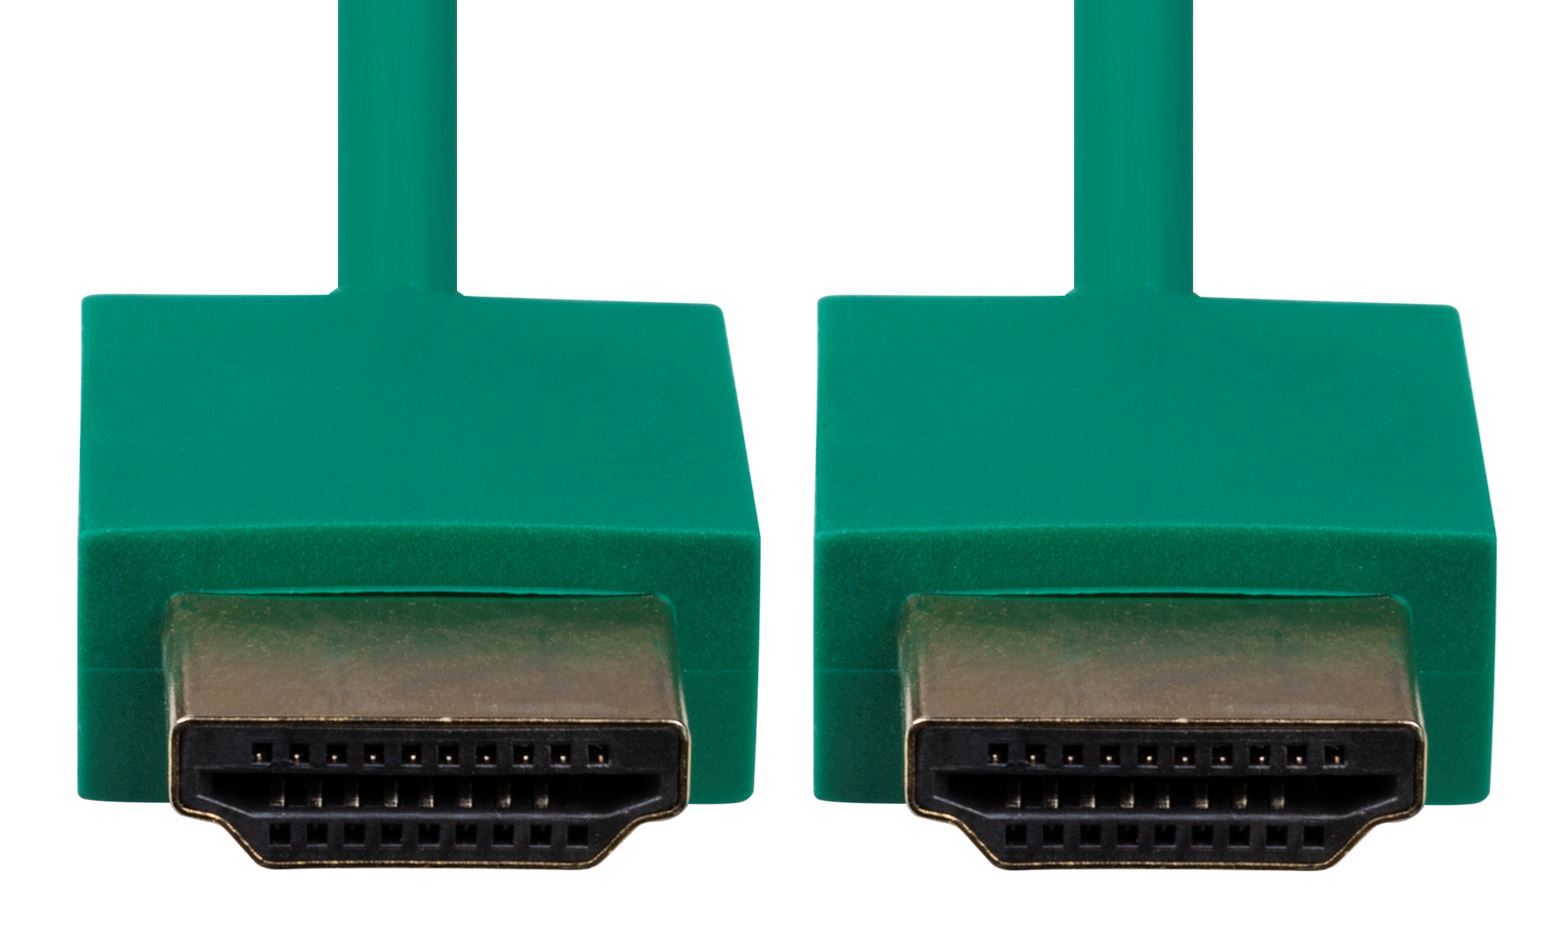 DYNAMIX_1M_HDMI_GREEN_Nano_High_Speed_With_Ethernet_Cable._Designed_for_UHD_Display_up_to_4K2K@60Hz._Slimline_Robust_Cable._Supports_CEC_2.0,_3D,_&_ARC._Supports_Up_to_32_Audio_Channels. 755